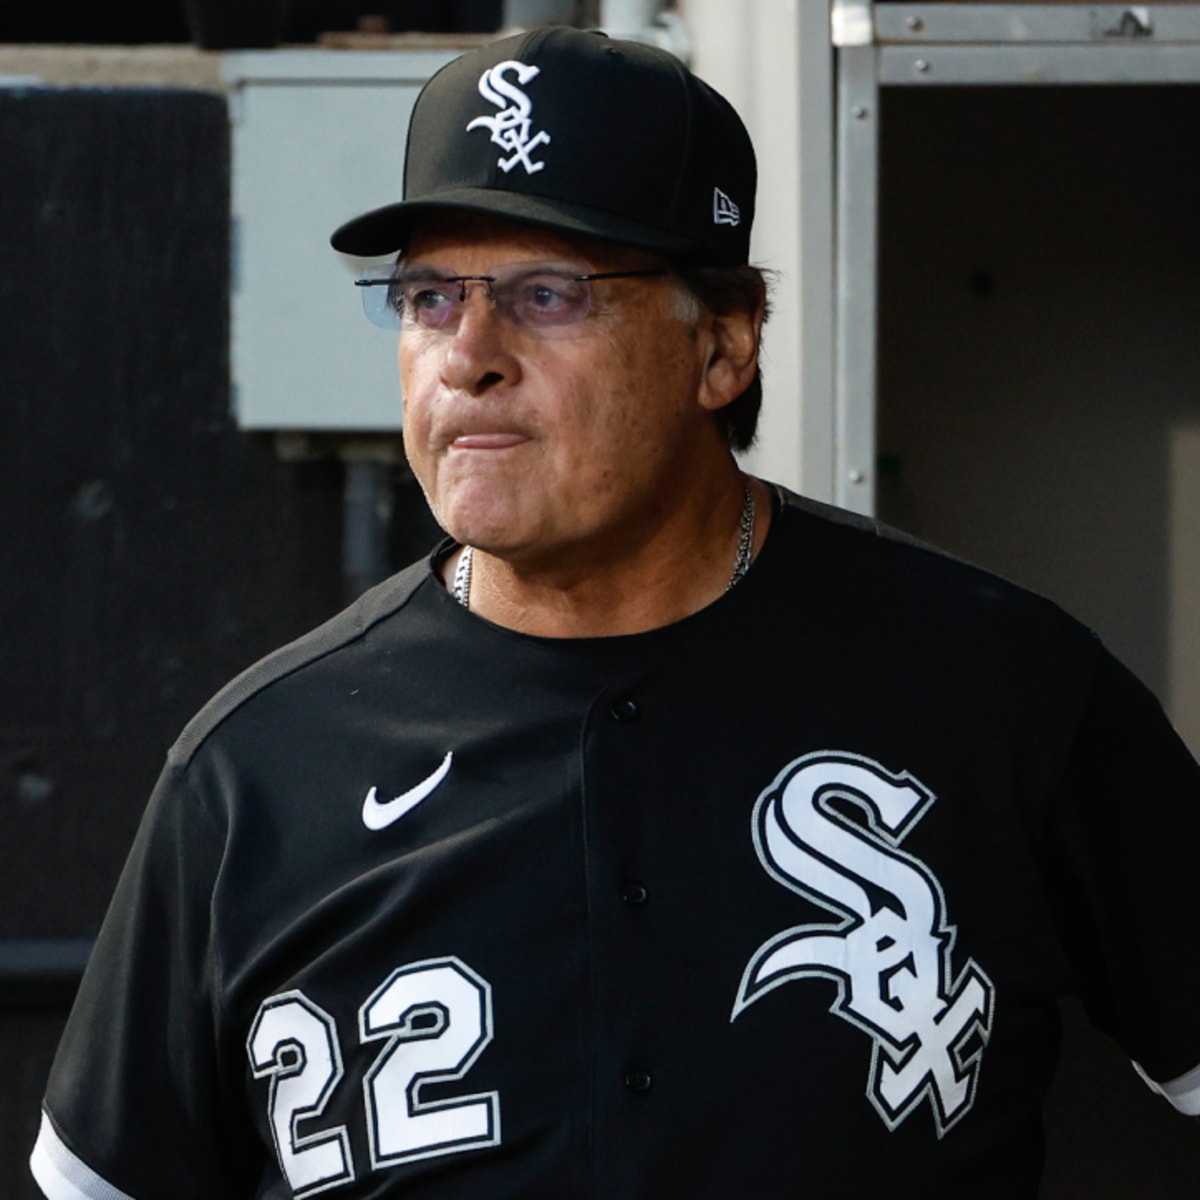 Tony La Russa: Chicago White Sox manager to return in 2022